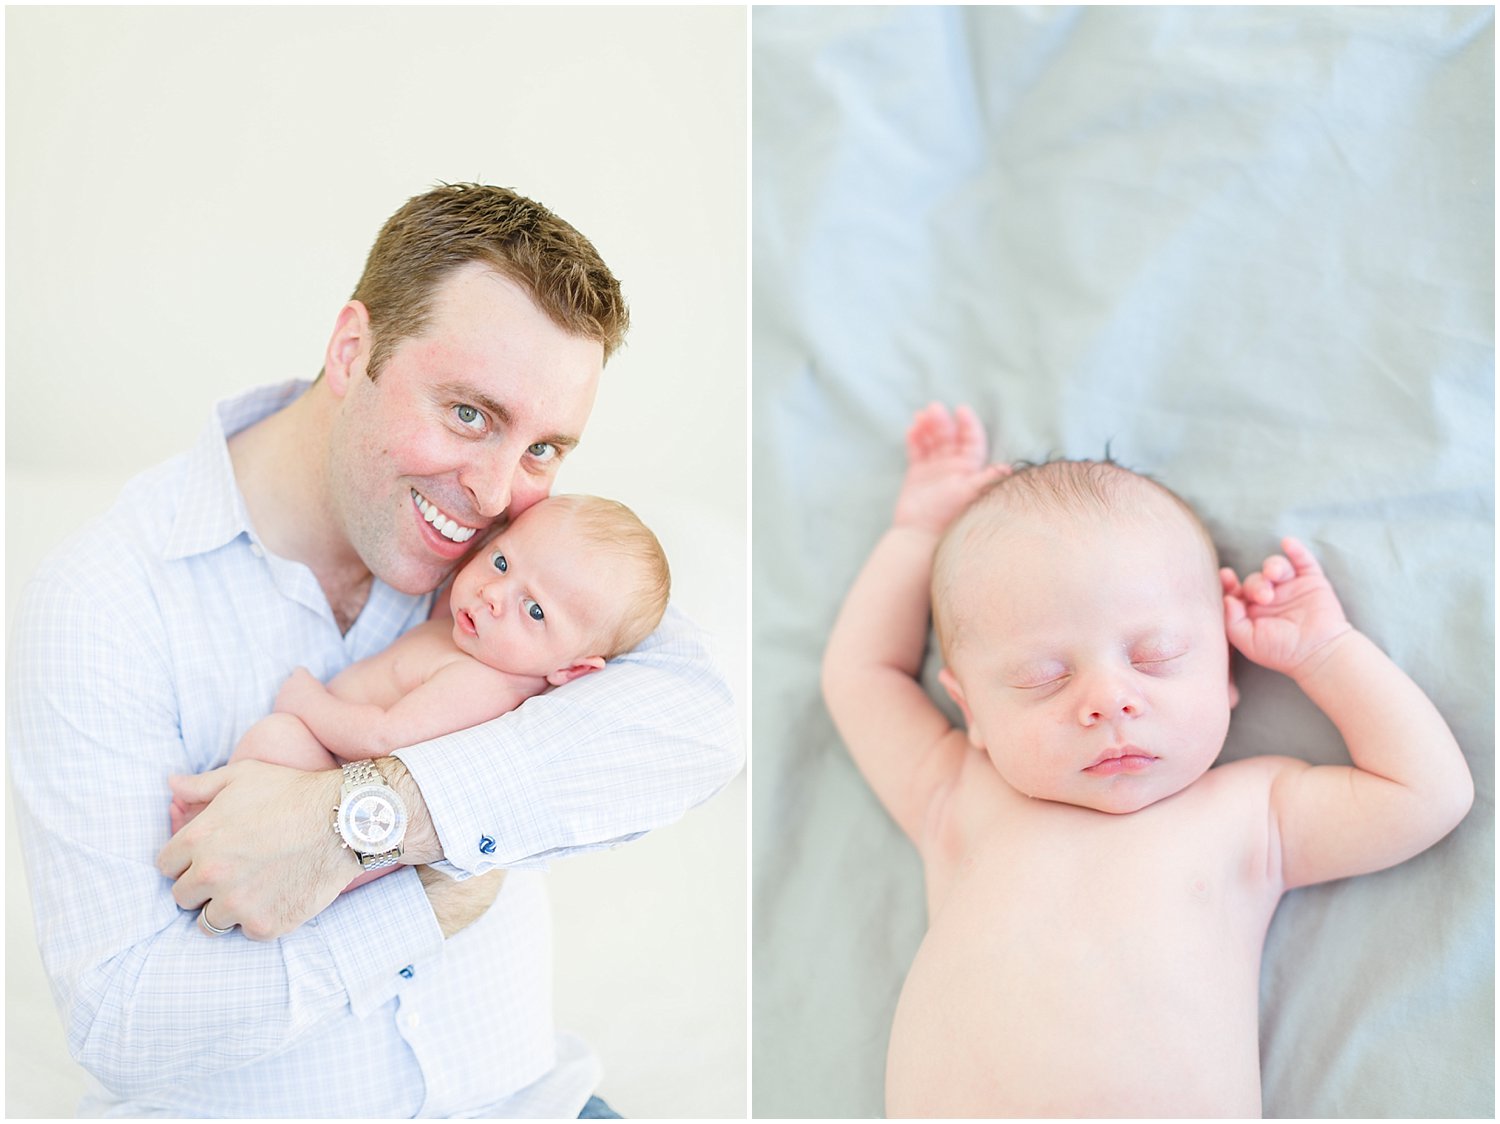 blueberryphotography.com | Lifestyle and Family Photographer in San Francisco | Blueberry Photography